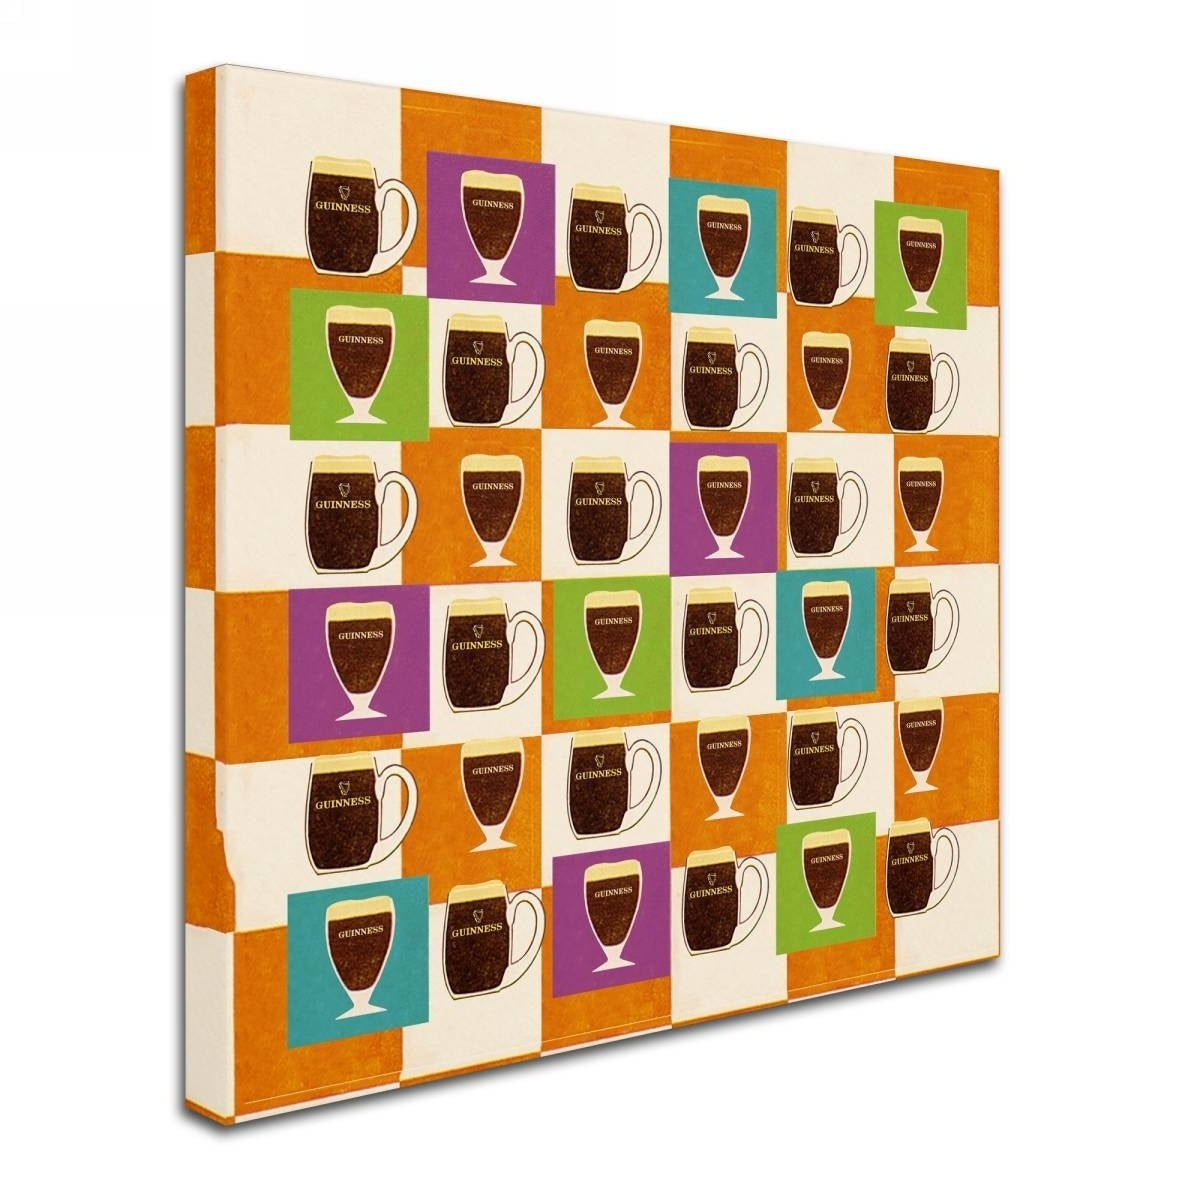 Guinness Brewery 'Guinness IV' canvas wall art featuring coffee cups for your home bar.